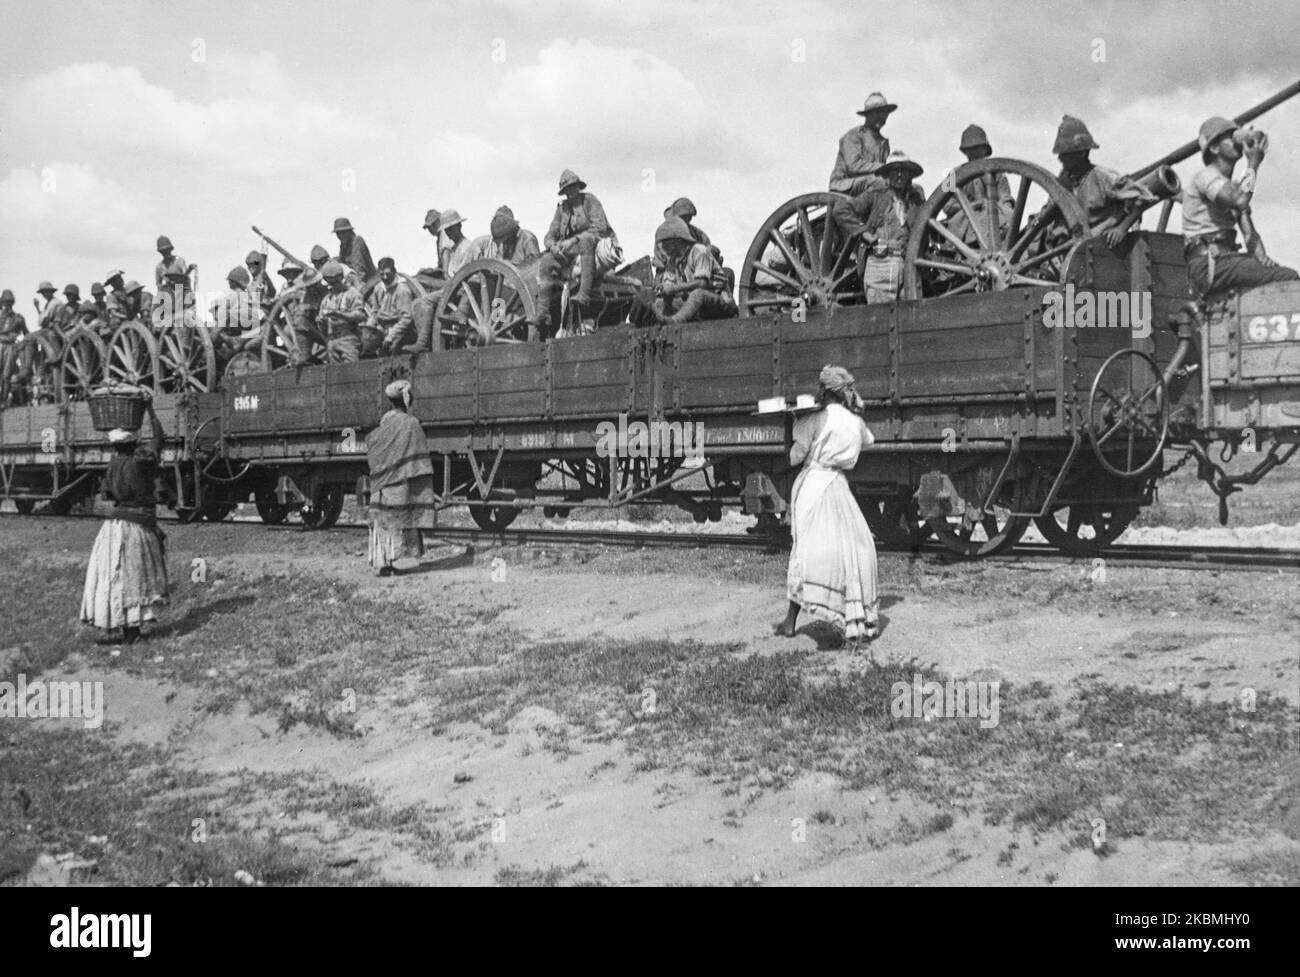 A British Army Howitzer battery being transported on a train in South Africa during The Boer War. Stock Photo